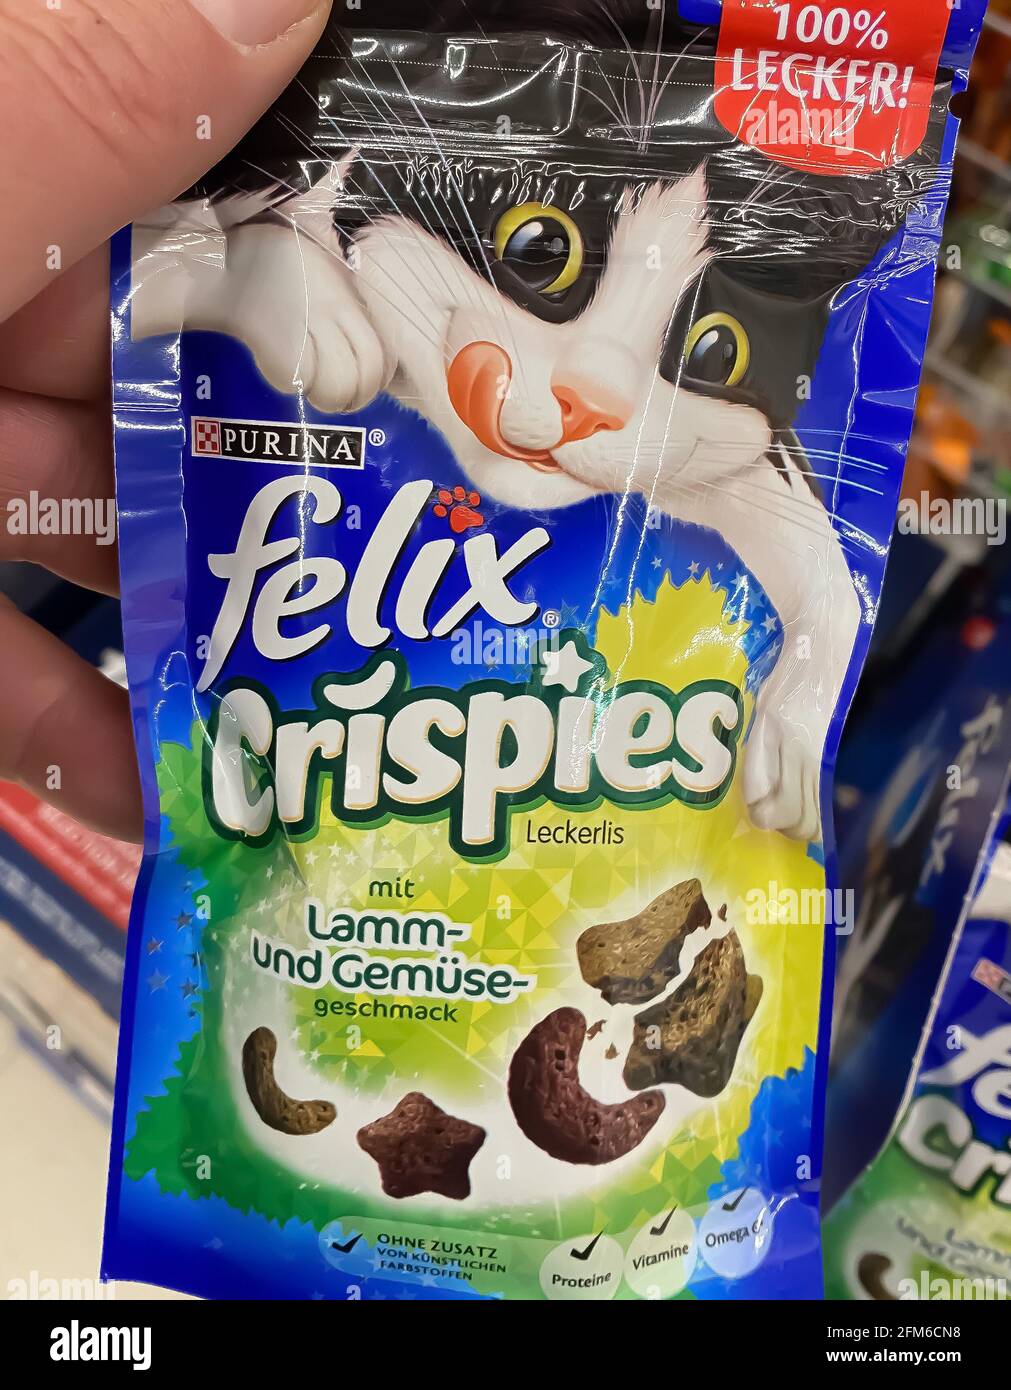 viersen germany may 6 2021 closeup of packet with logo lettering of felix crispies cat food in shelf of german supermarket 2FM6CN8